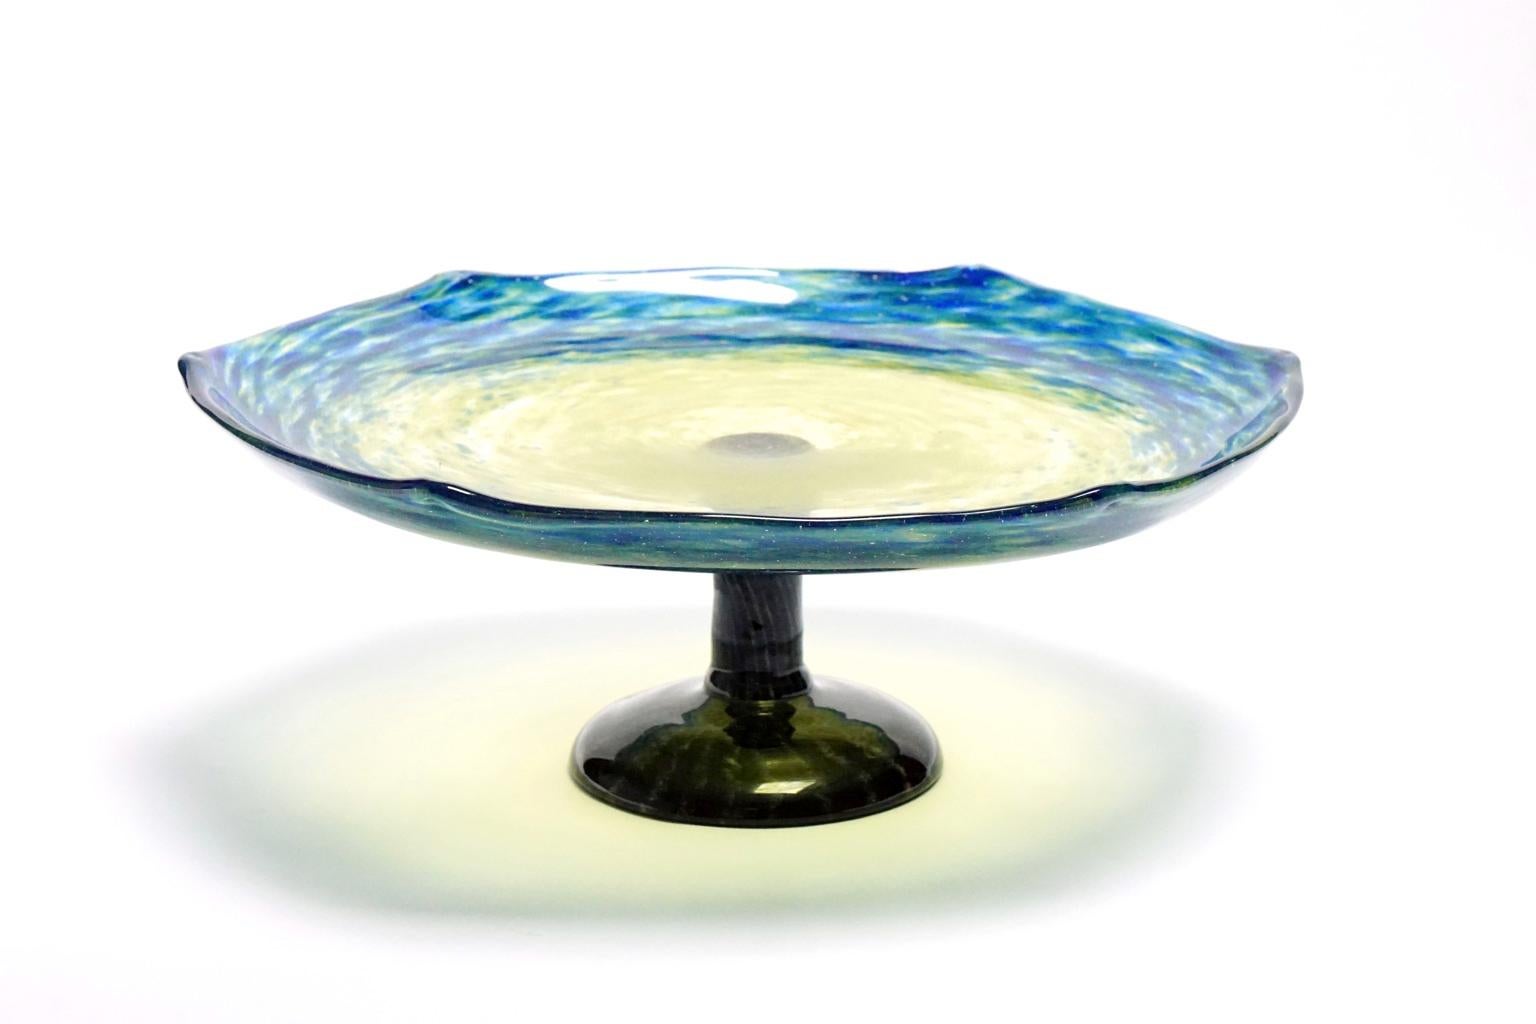 French Art Deco jade yellow and blue bowl with stripped dark foot. Six points obtained by pulling the glass. Signed Schneider. Very good condition.

The Jade series, like this bowl, played a major role in Charles Schneider's Art Deco production.